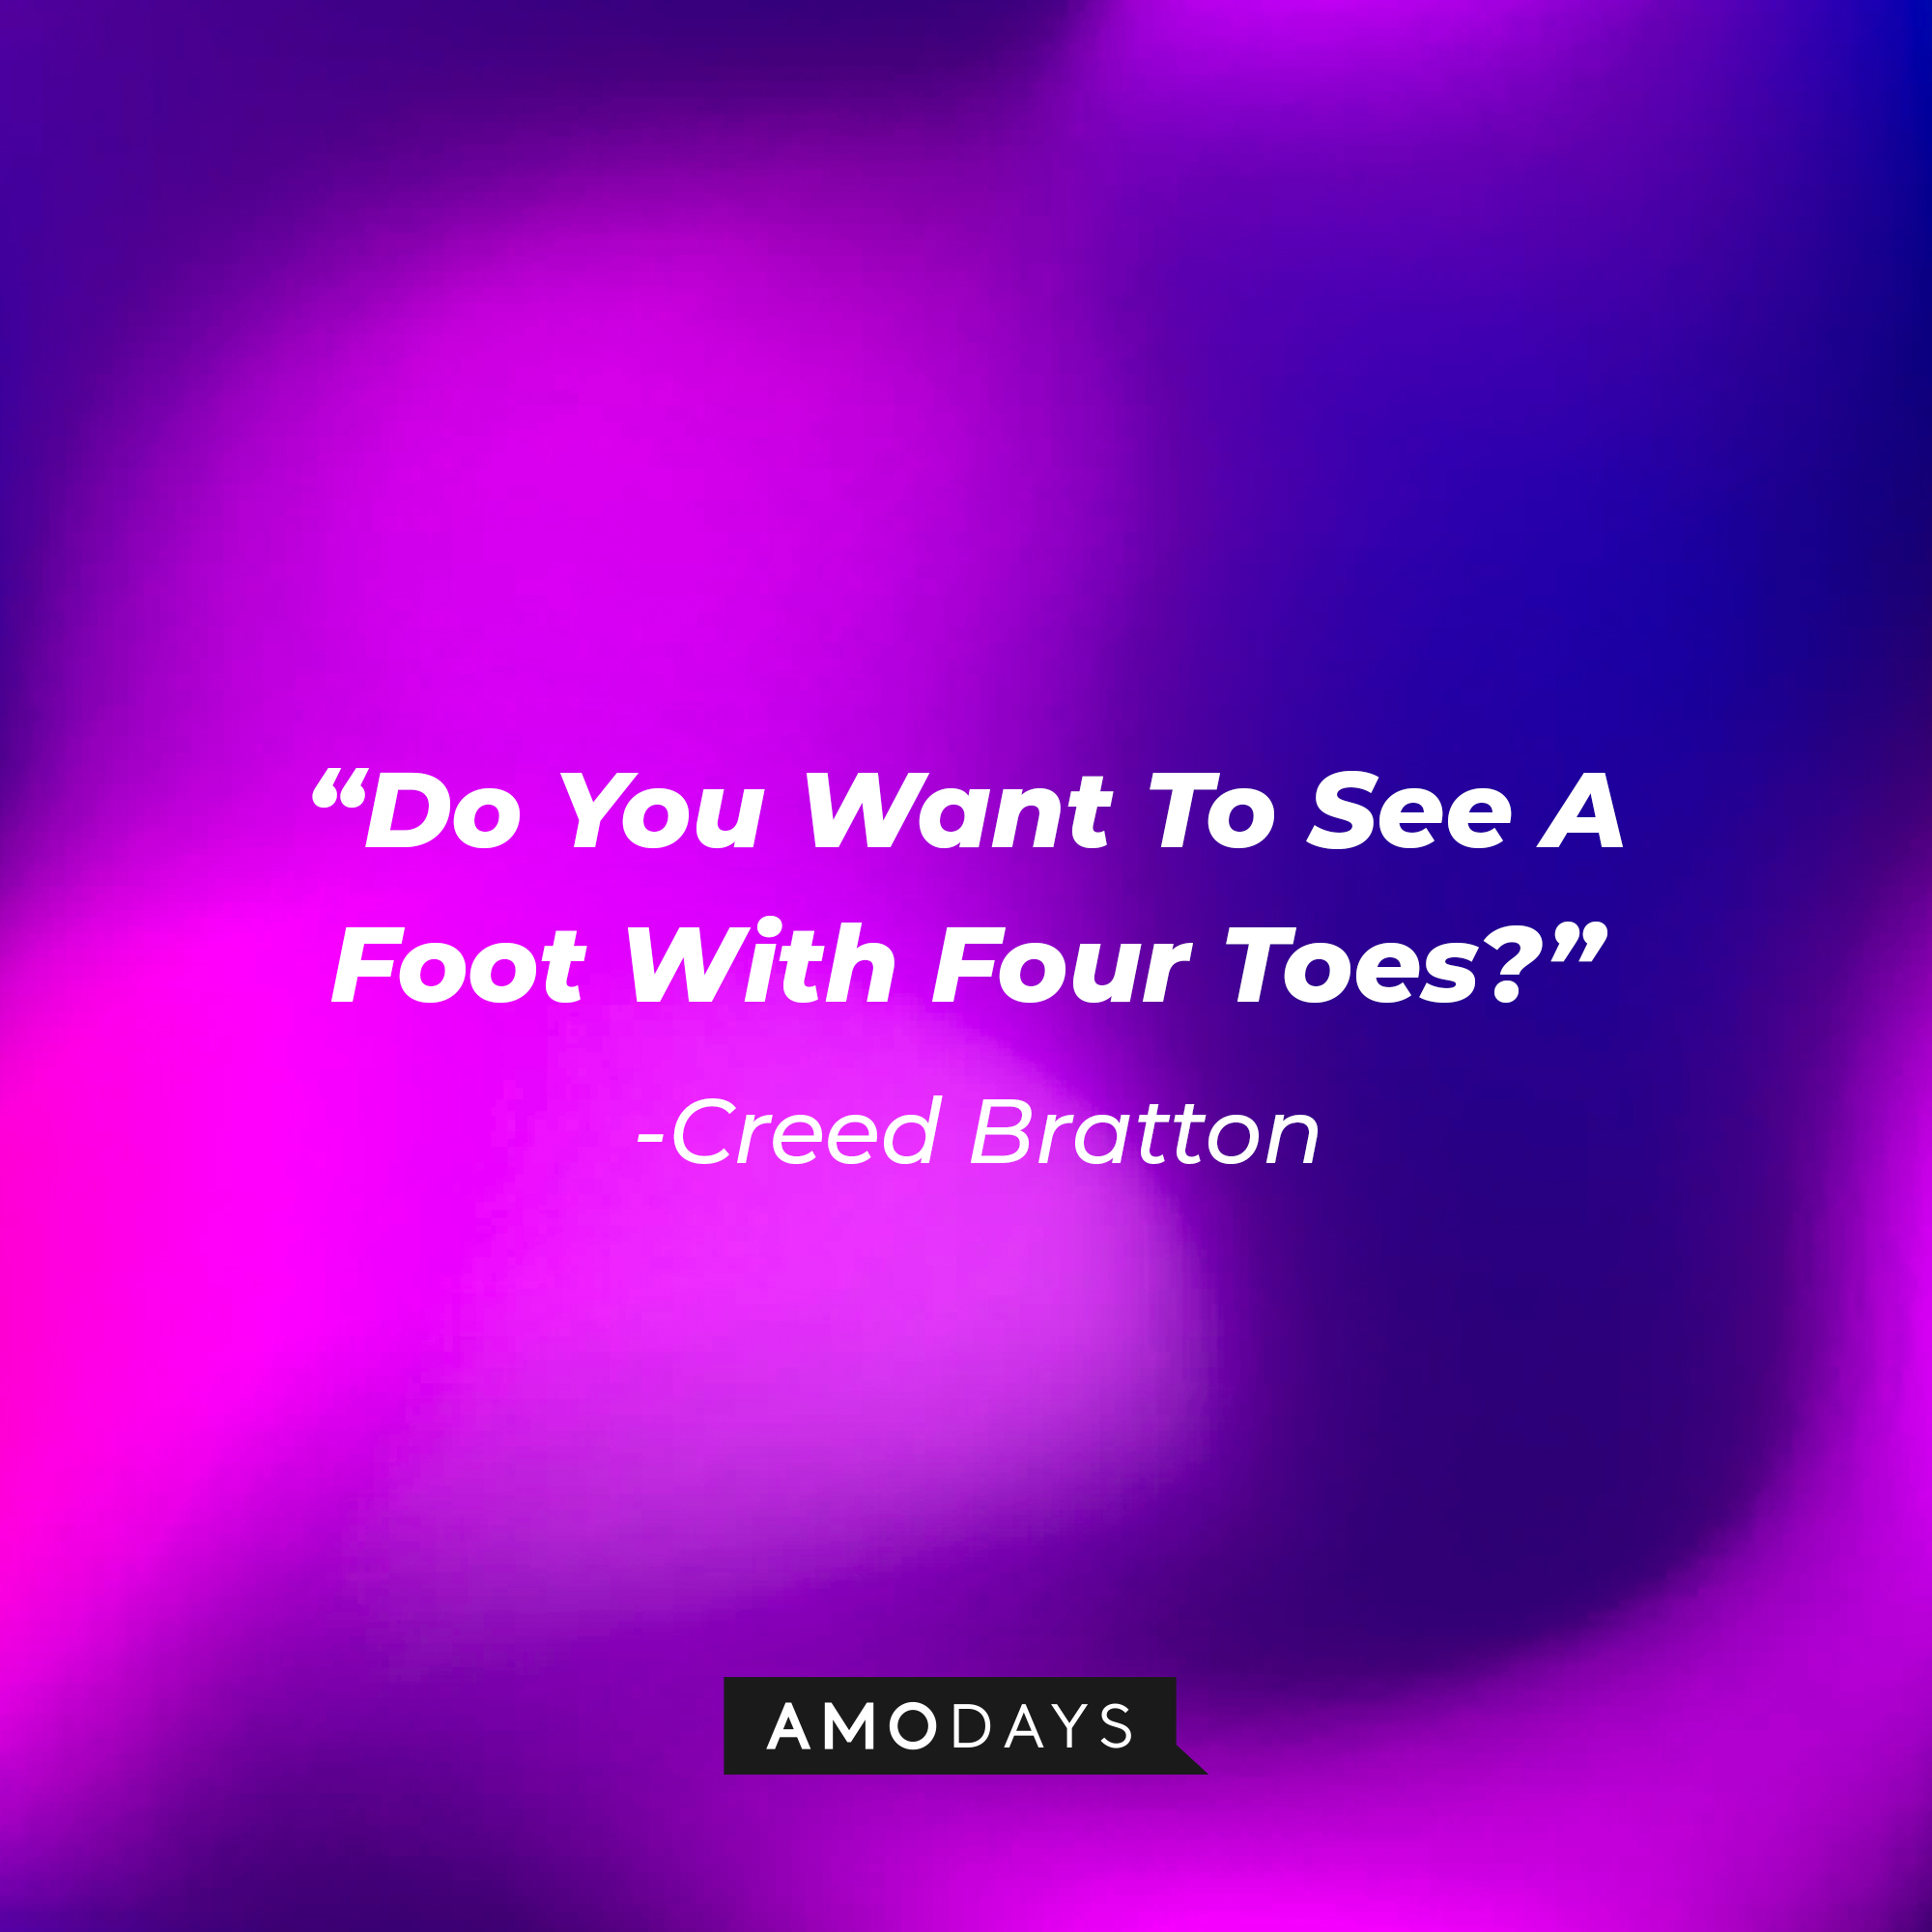 Creed Bratton's quote: "Do You Want To See A Foot With Four Toes?" | Source: Amodays